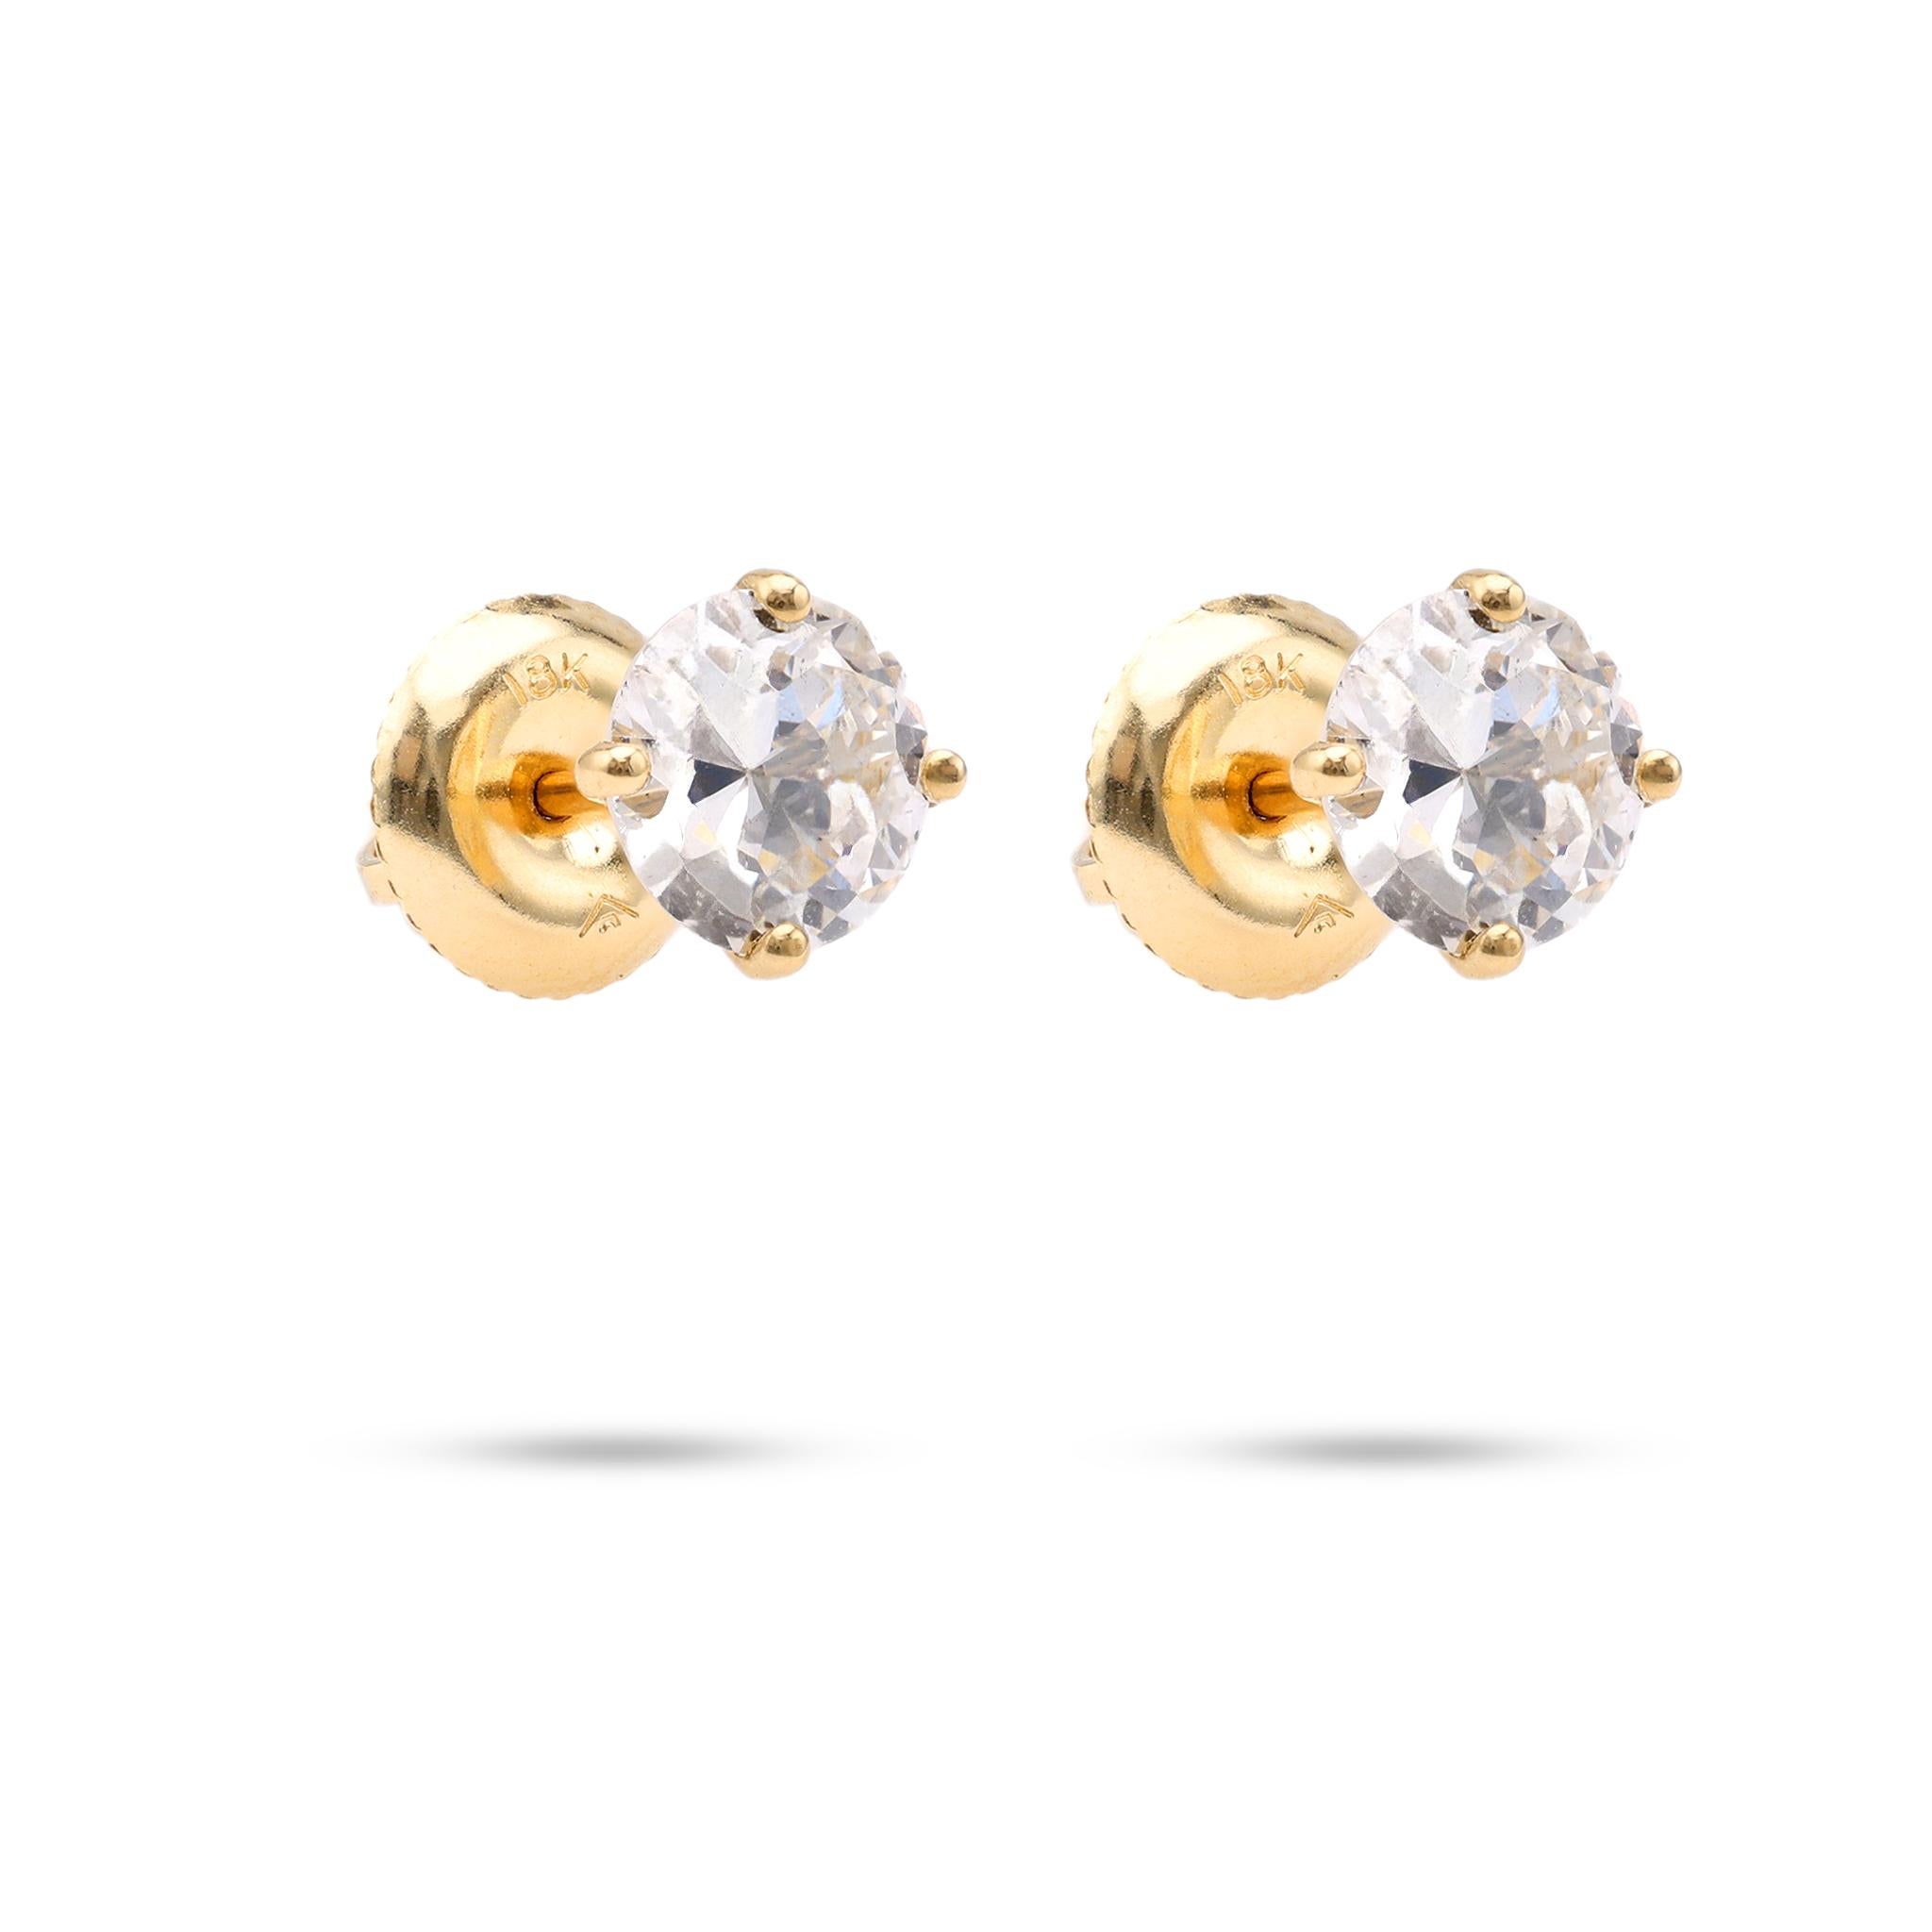 1.32 Carat Total Weight Diamond 18k Yellow Gold Stud Earrings In Excellent Condition For Sale In Beverly Hills, CA